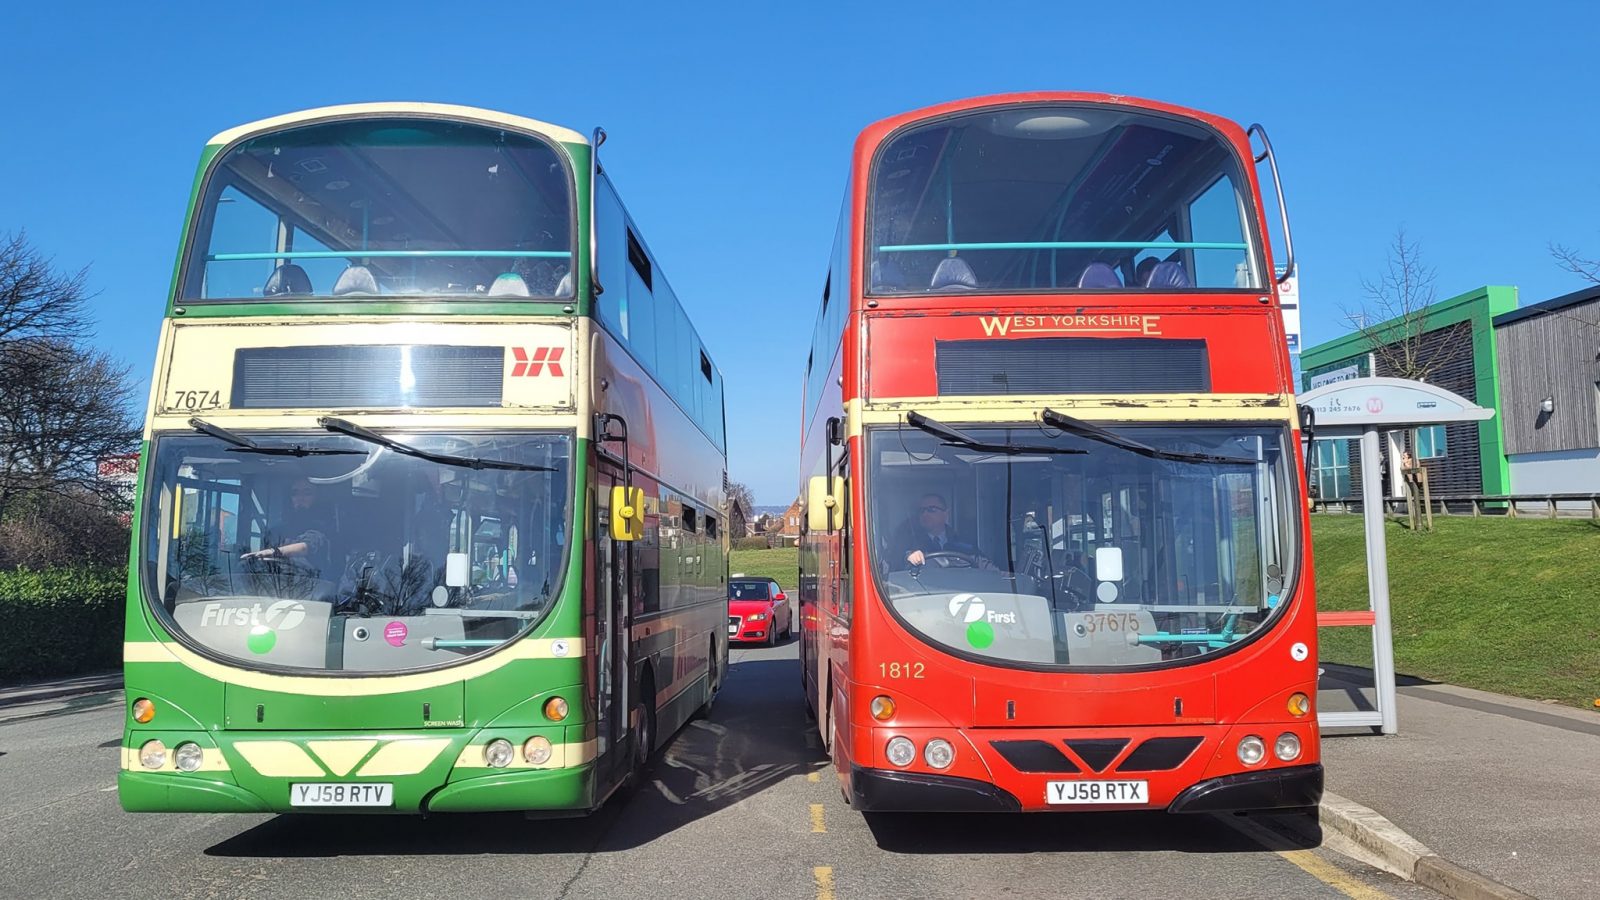 two buses side by side at a bus stop